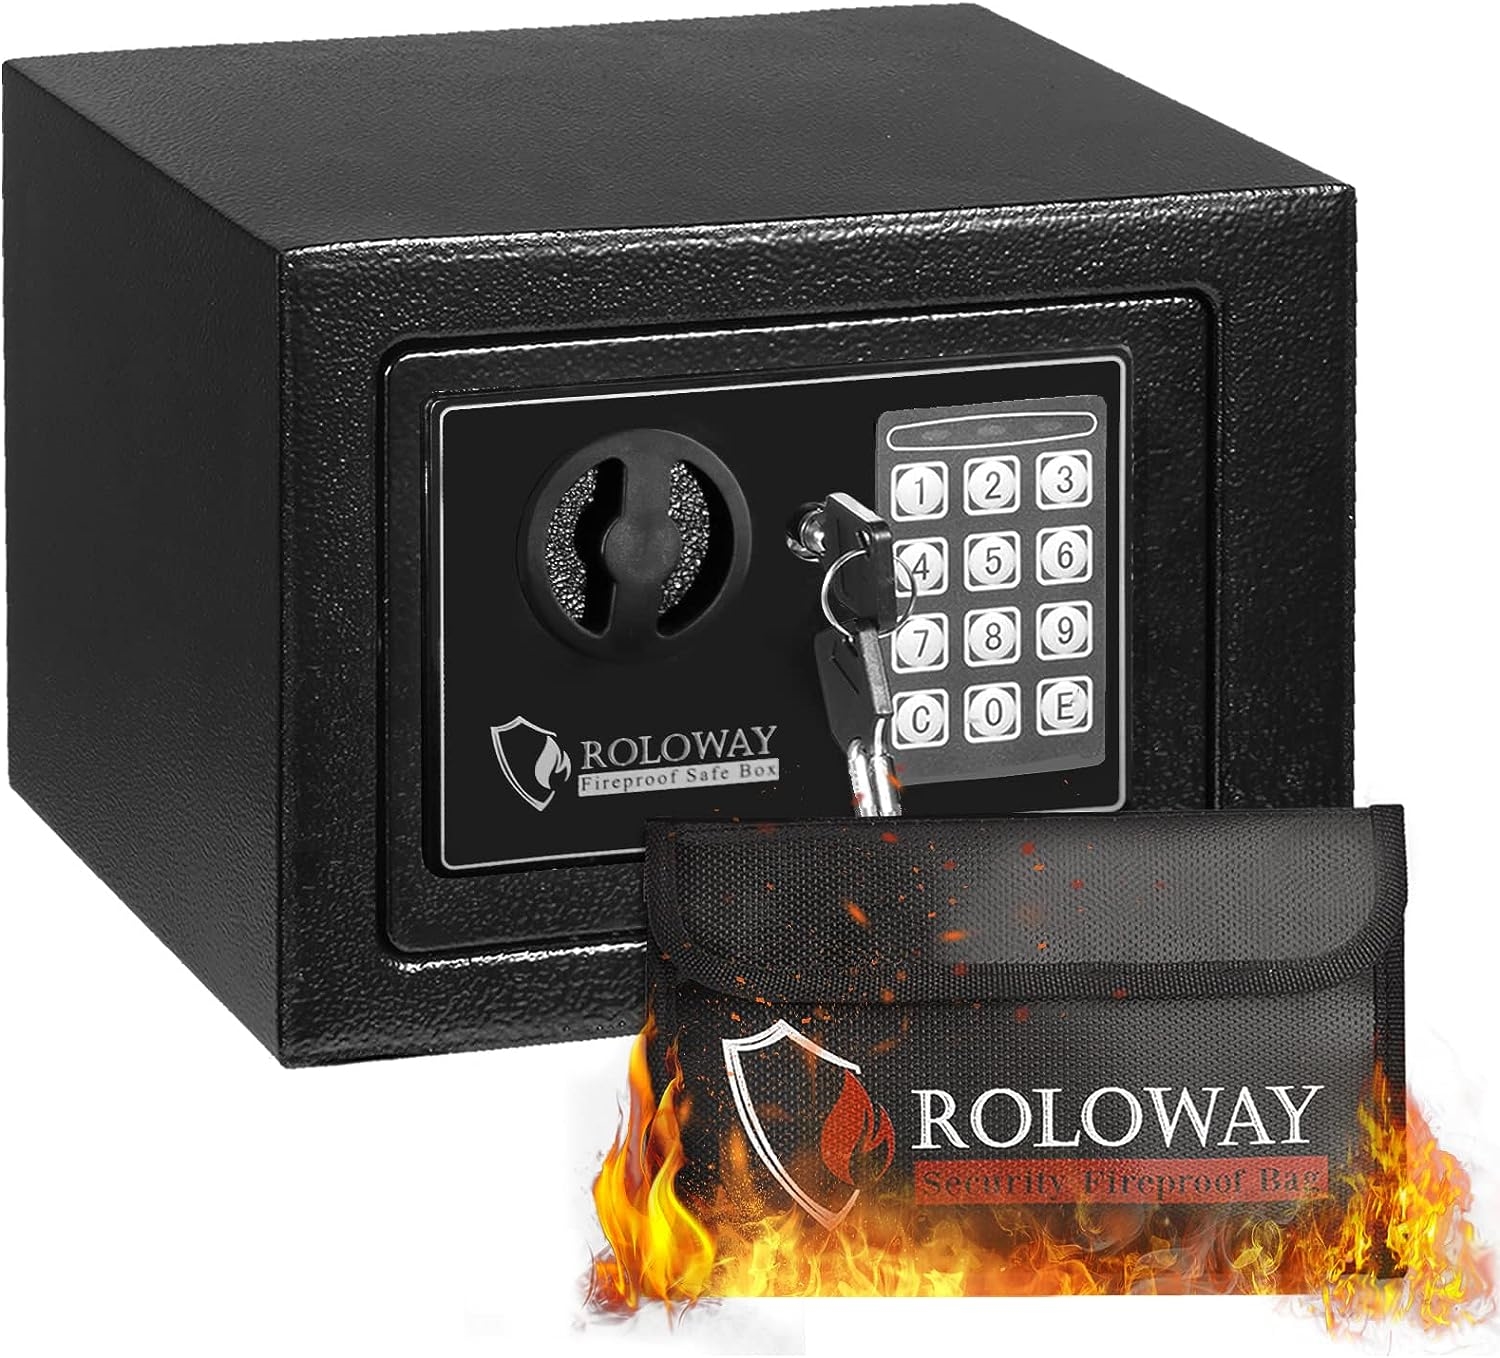 ROLOWAY Steel Electronic Safe Box | DeviceDaily.com